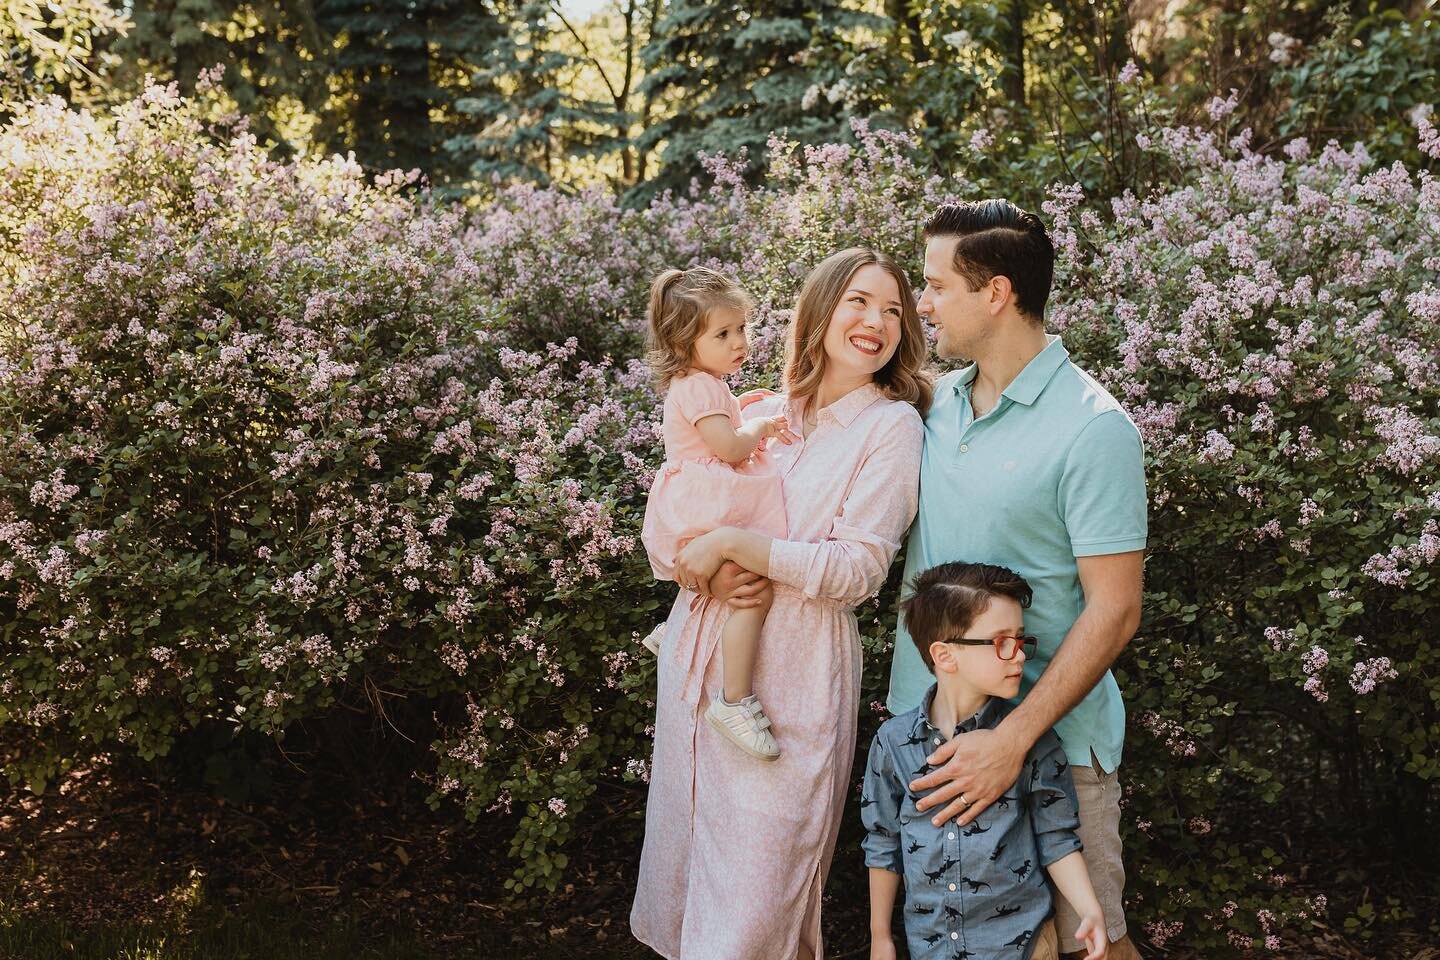 Just breathe in those lilacs. ✨ I was really hoping to get to do mini sessions during lilac season this year, but planning around the short bloom season and lockdown restrictions was a bit much. That will be the plan for next year. I&rsquo;m so happy